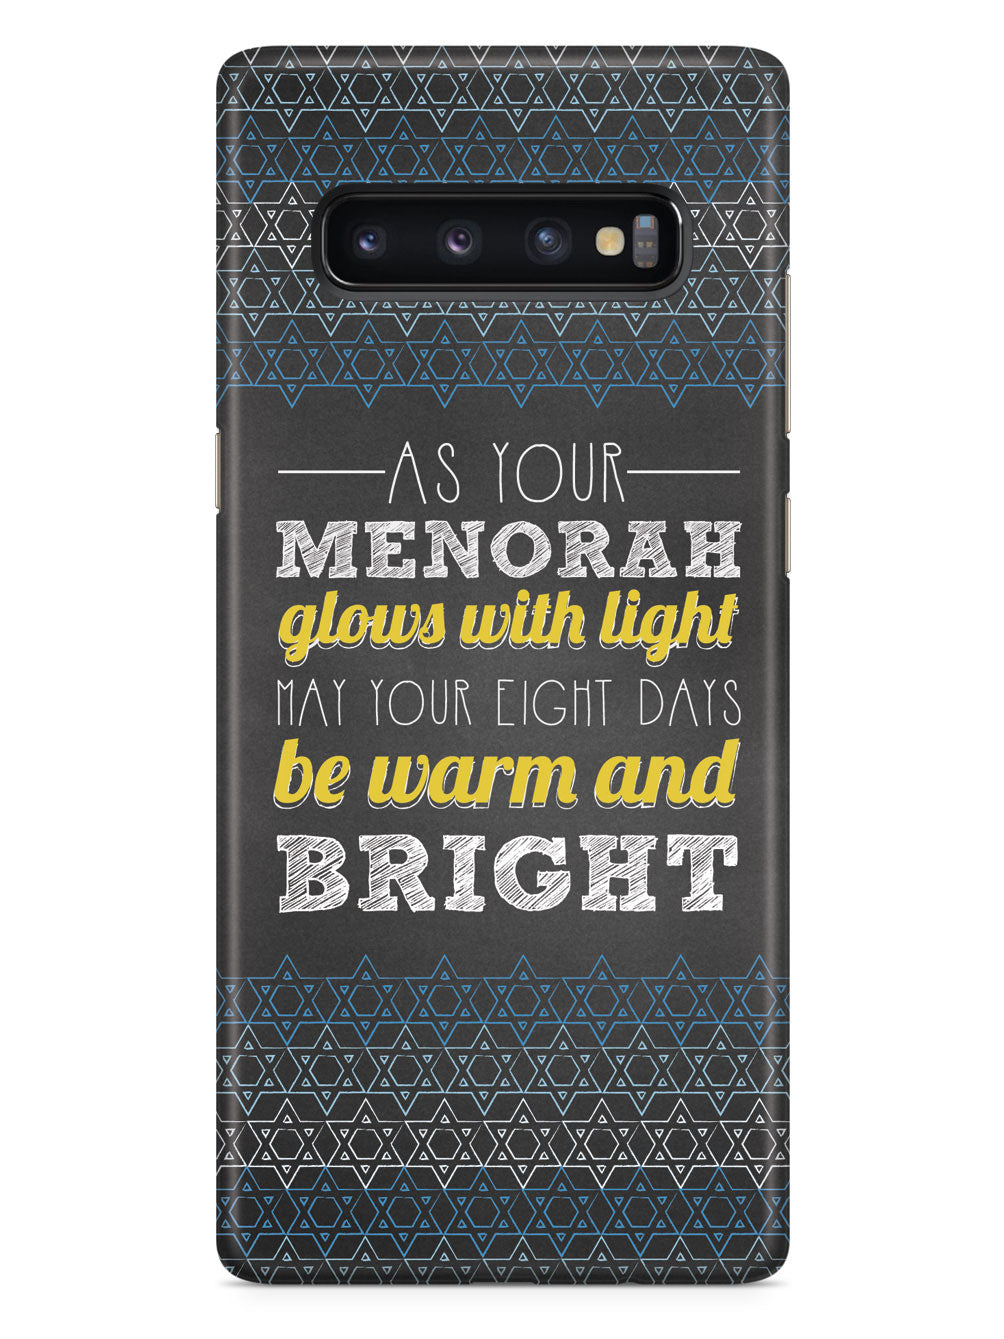 May Your Eight Days Be Warm and Bright - Hanukkah Case